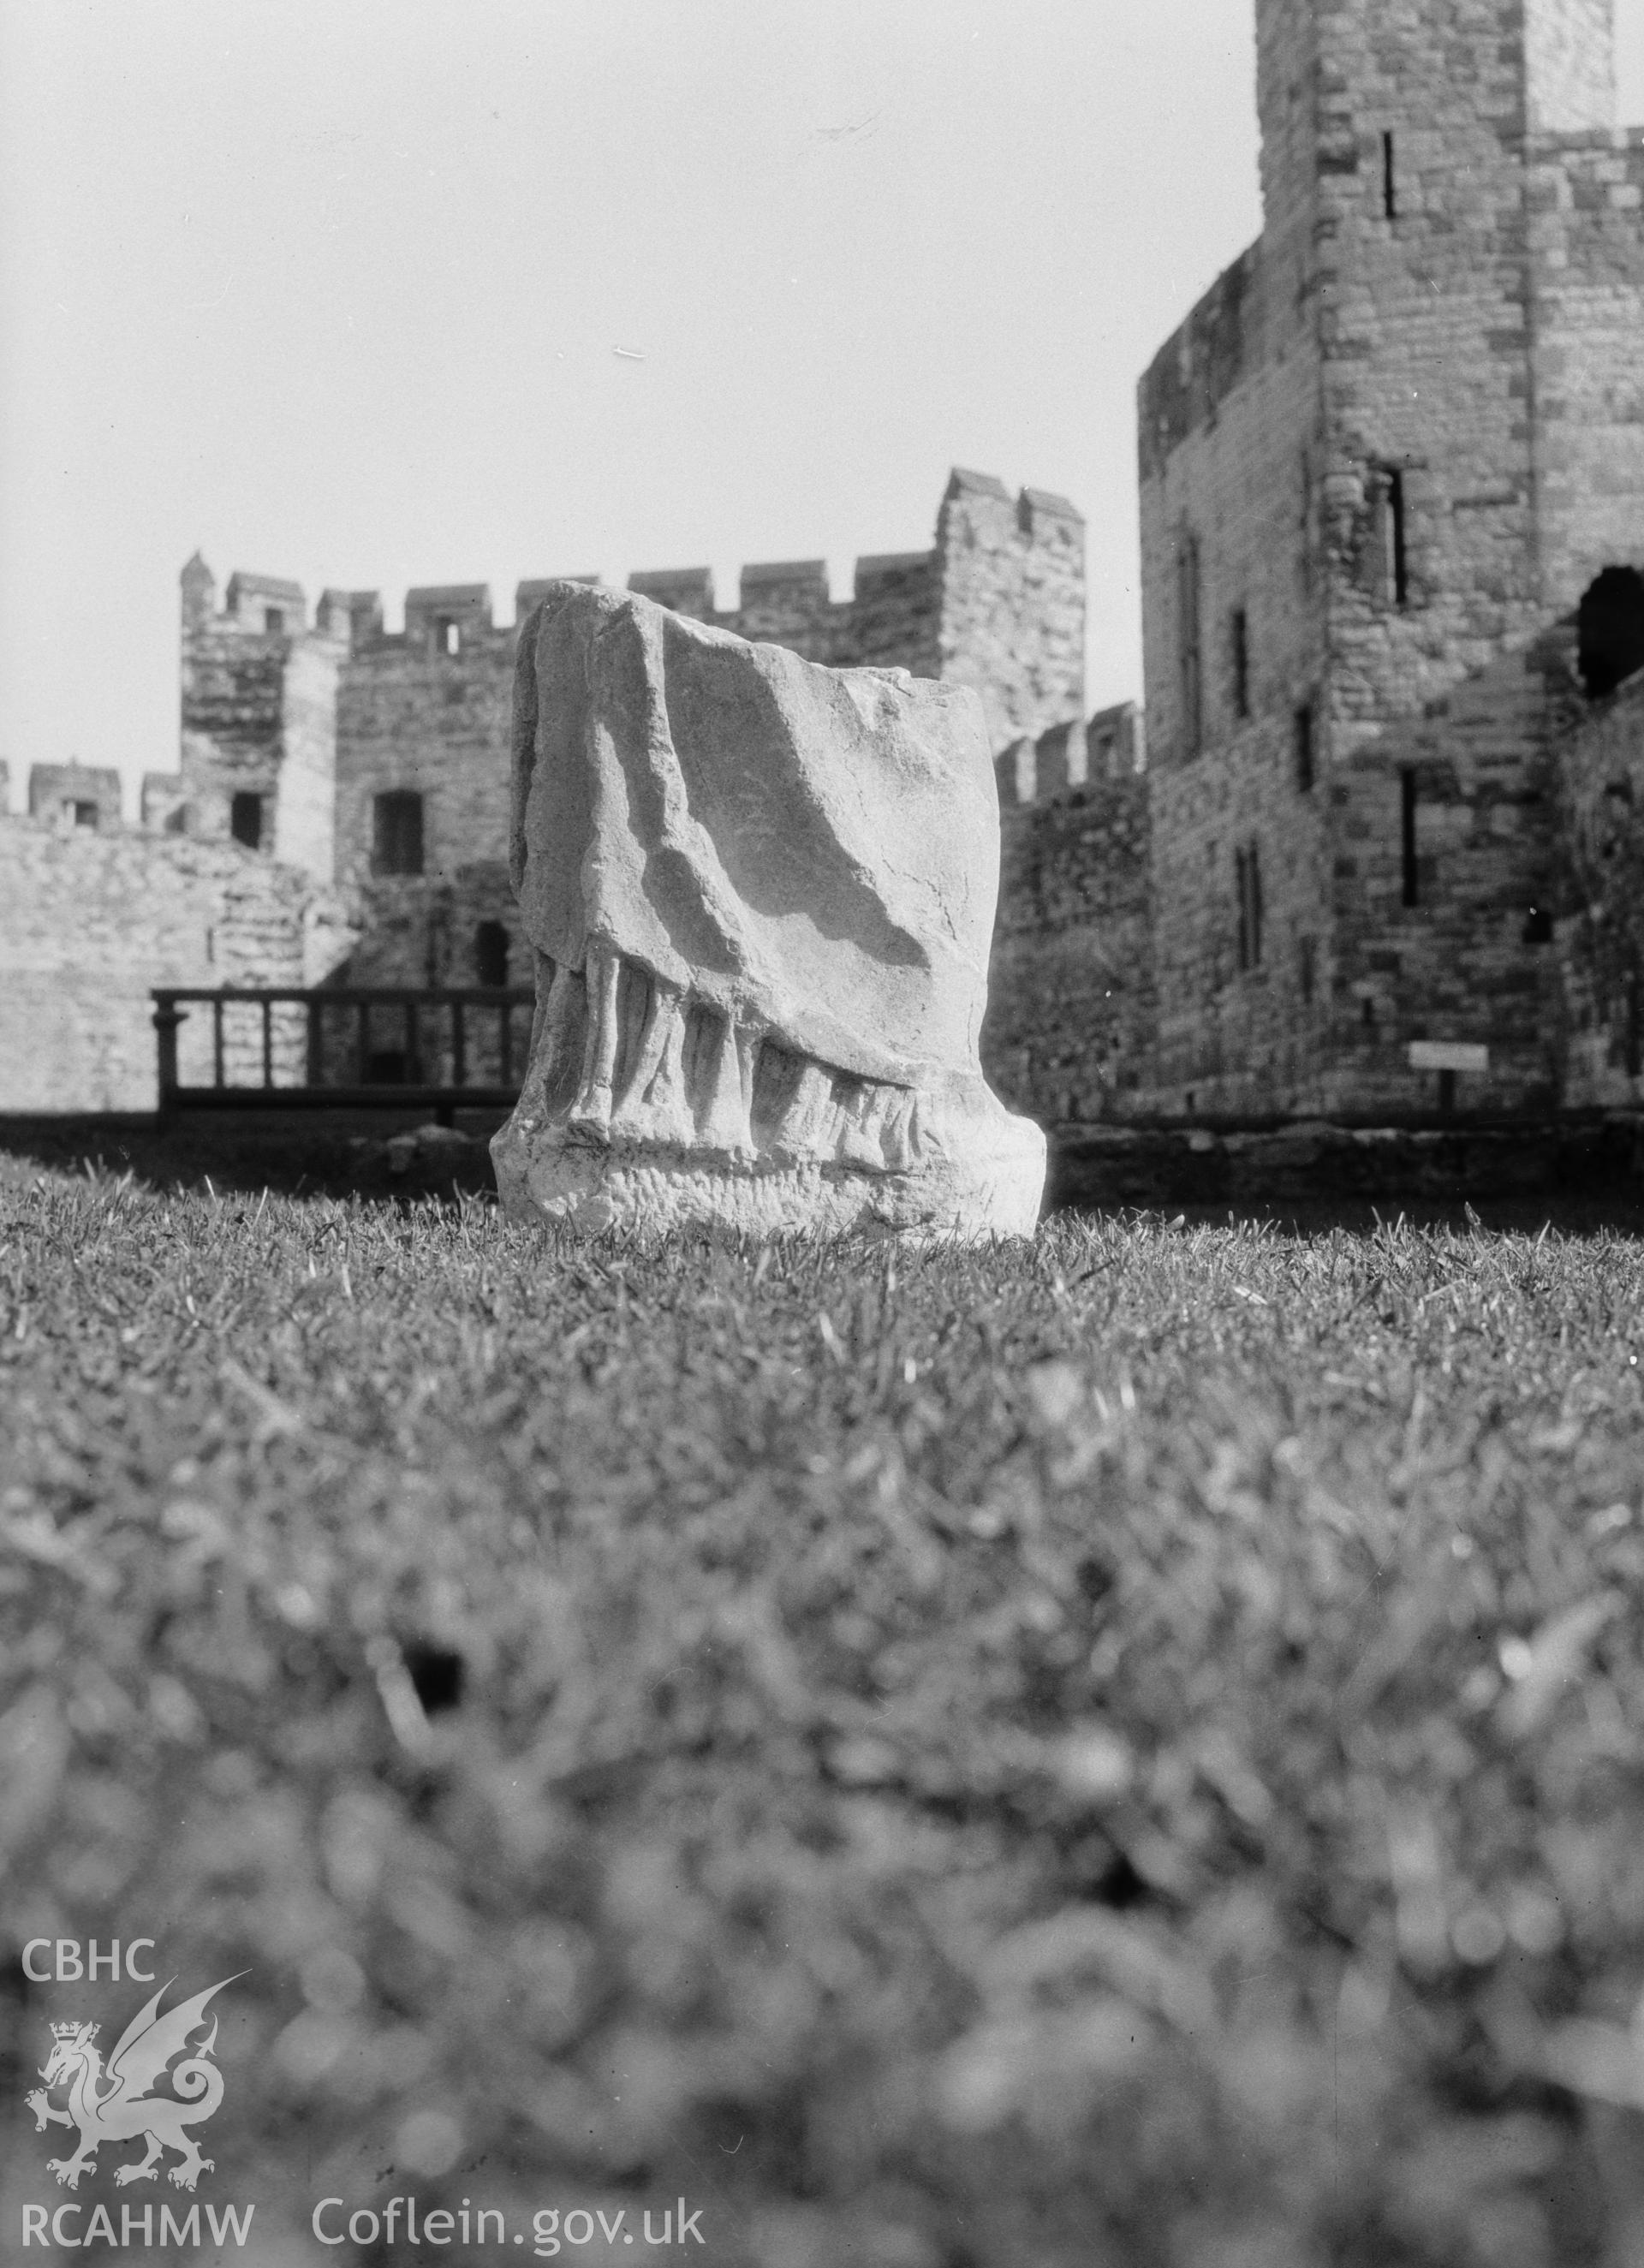 View of stone find on the lawn in front of Caernarfon Castle, Llanbeblig, taken 01.01.1956.